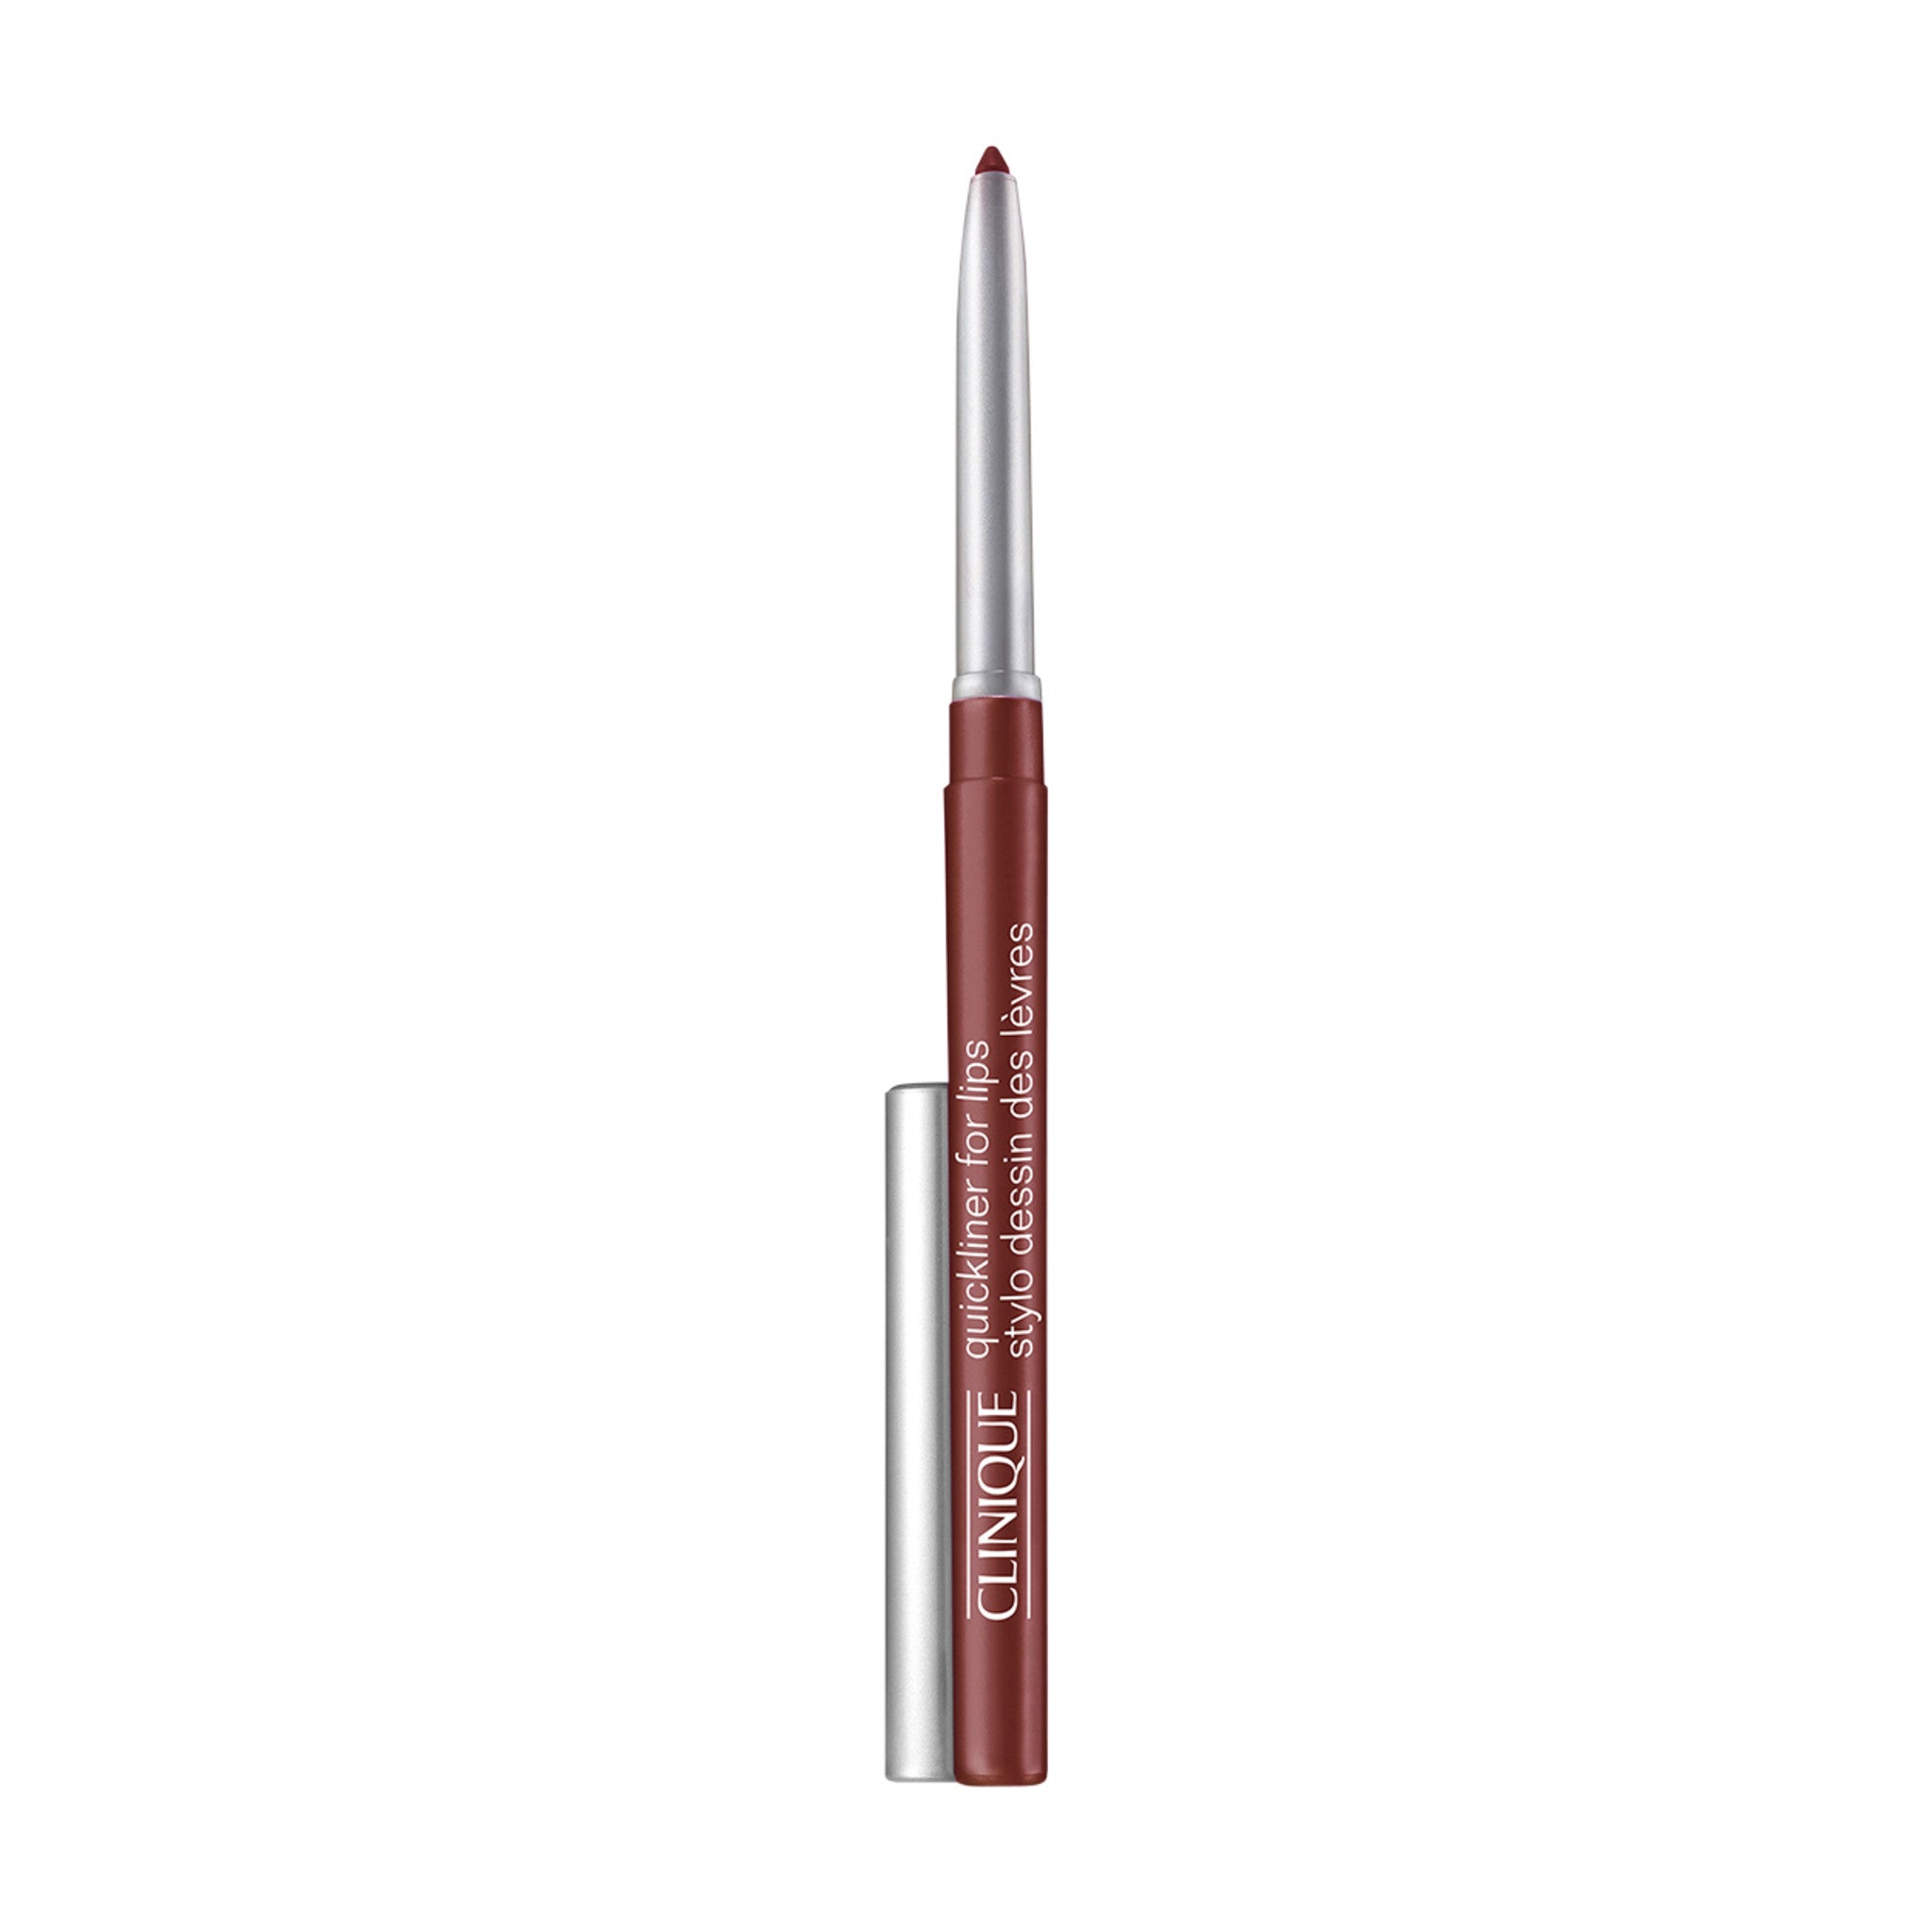 Clinique Quickliner For Lips Color/Shade variant: 48 BING CHERRY main image.